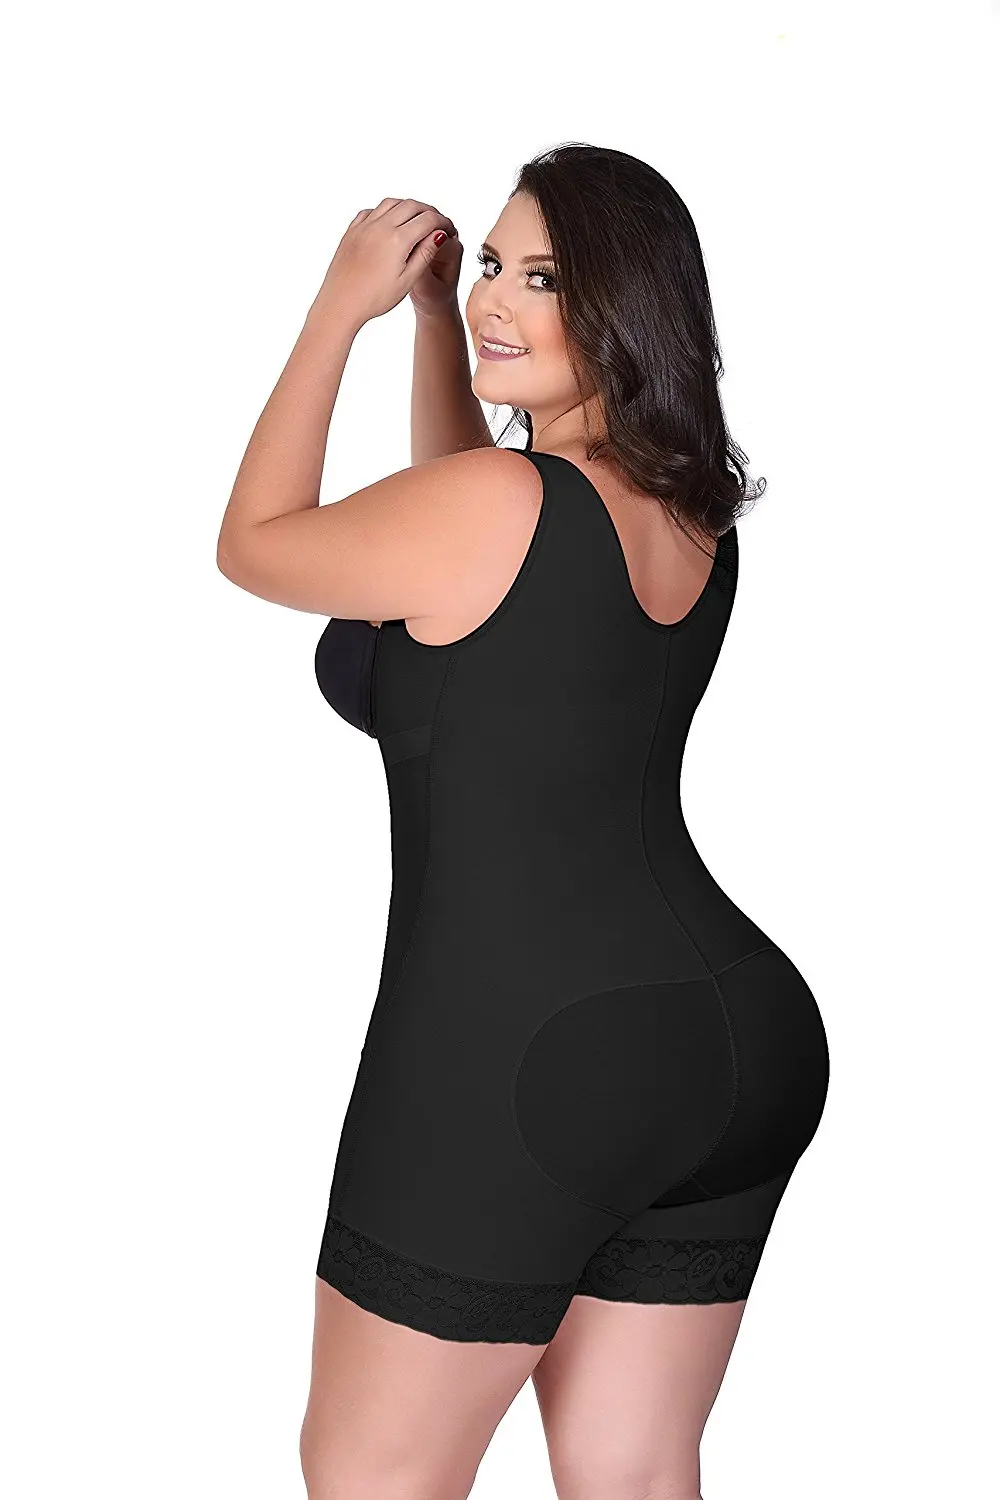 5 Day Plus Size Workout Shapewear with Comfort Workout Clothes